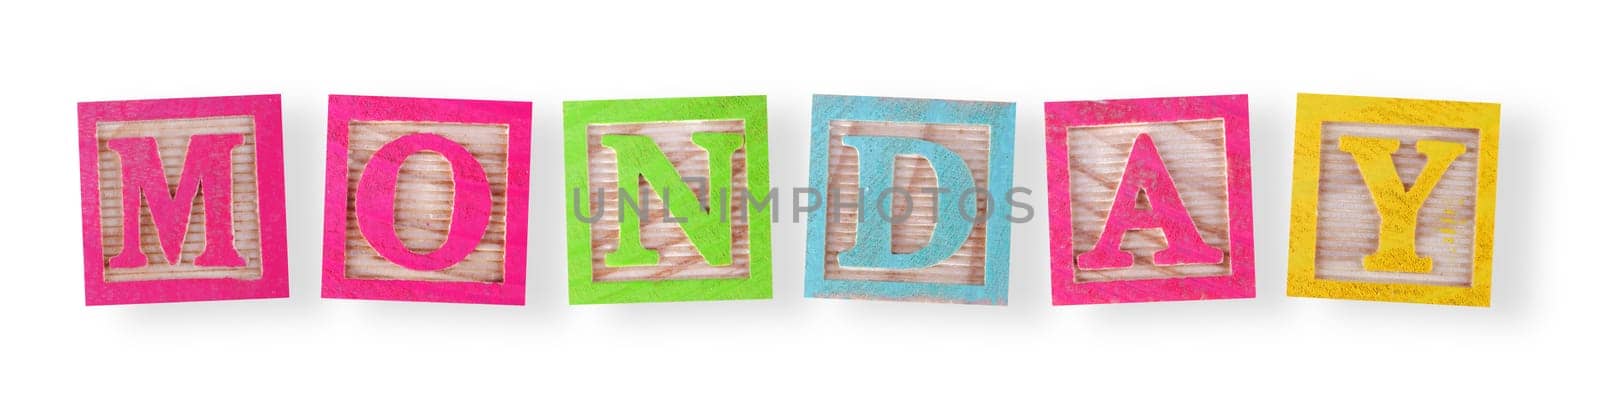 A Monday concept with childs wood blocks on white with clipping path to remove shadow